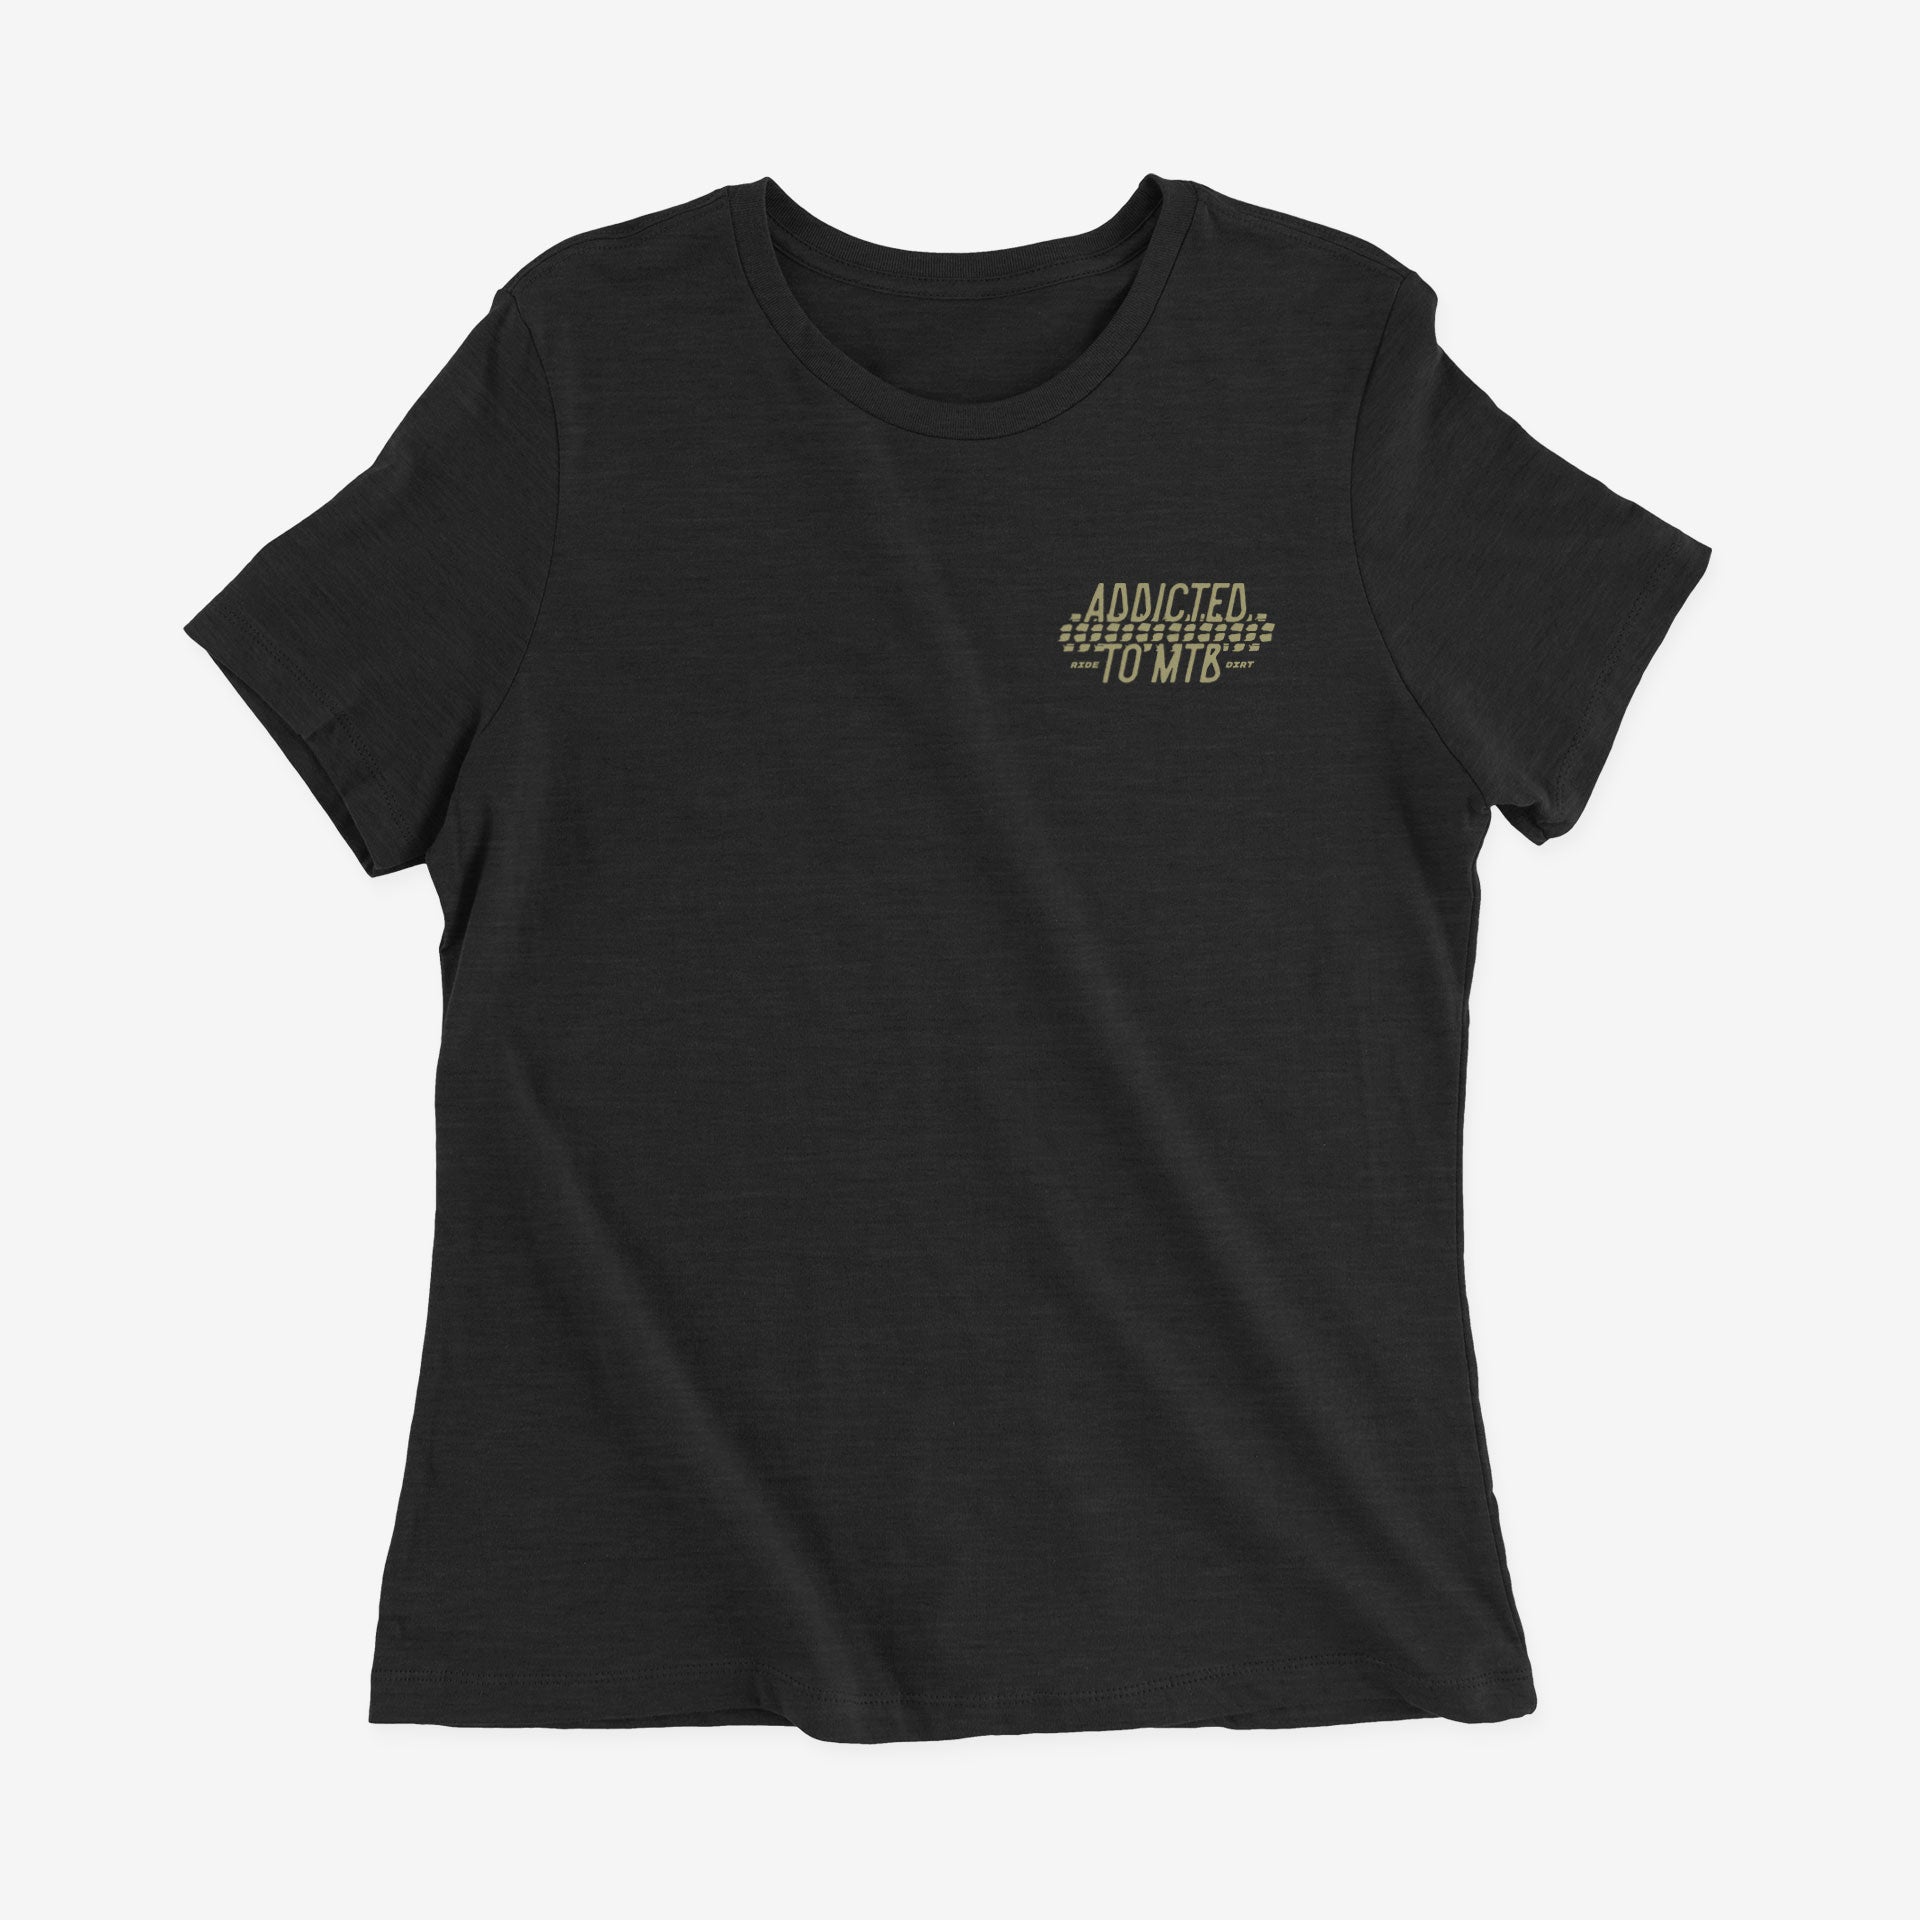 Women's Addicted to MTB Relaxed Triblend Tee